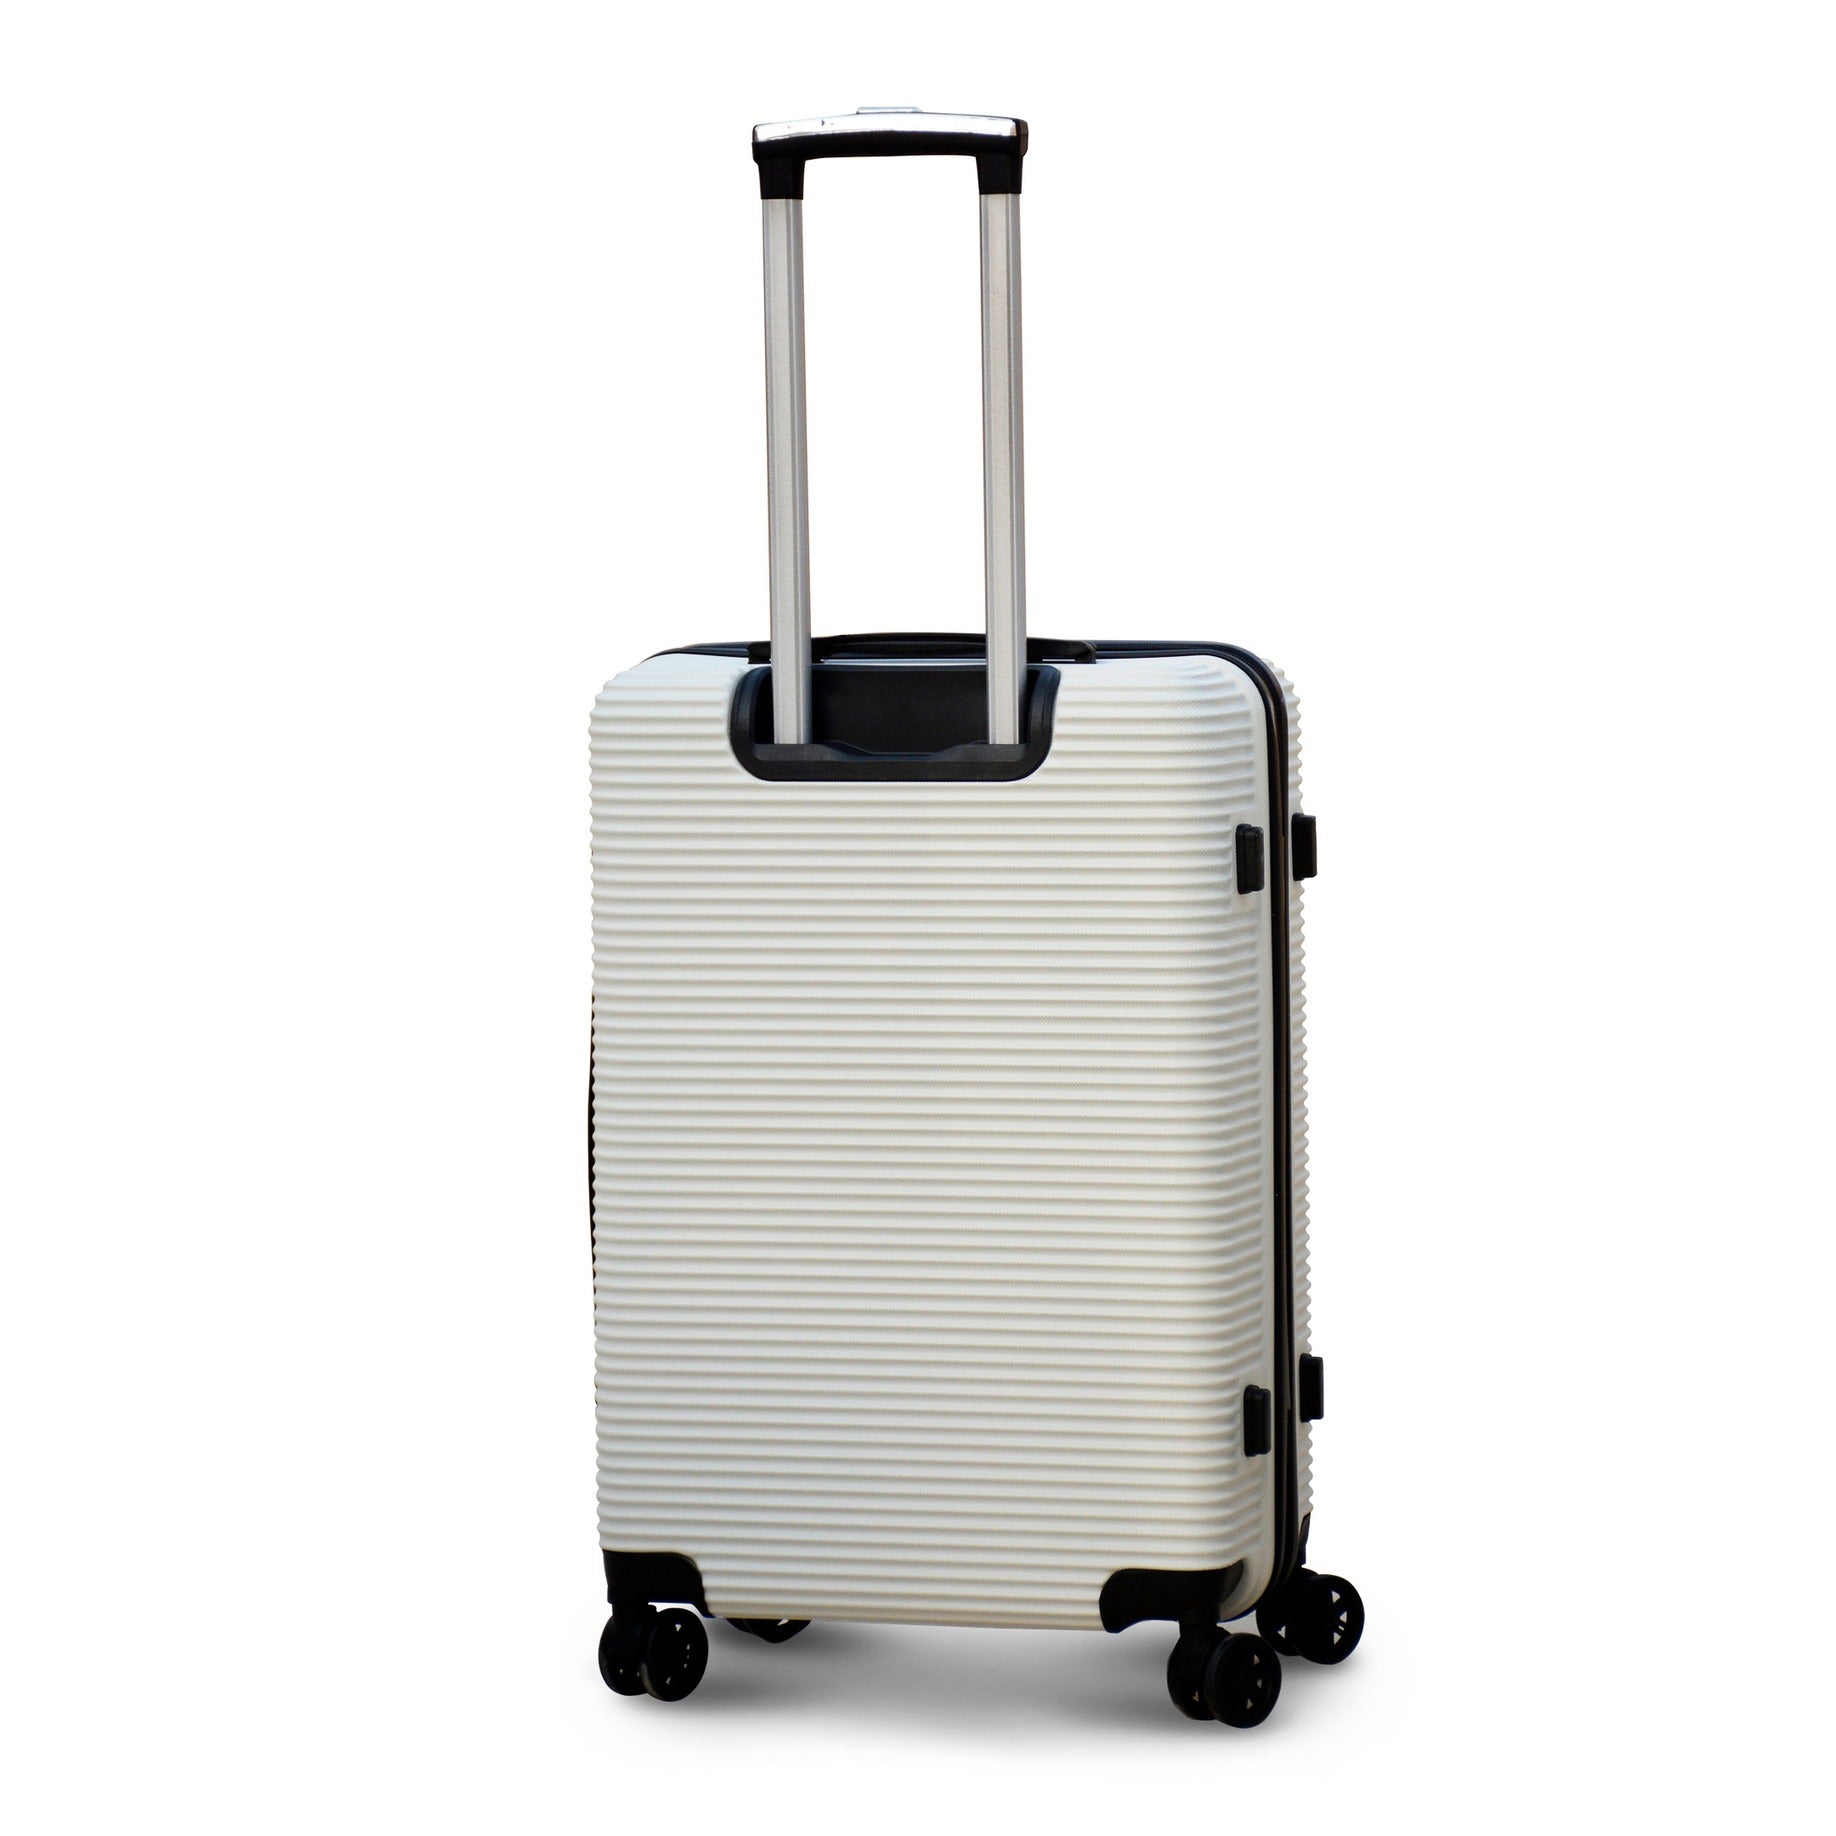 24" White Colour JIAN ABS Line Luggage Lightweight Hard Case Trolley Bag With Spinner Wheel